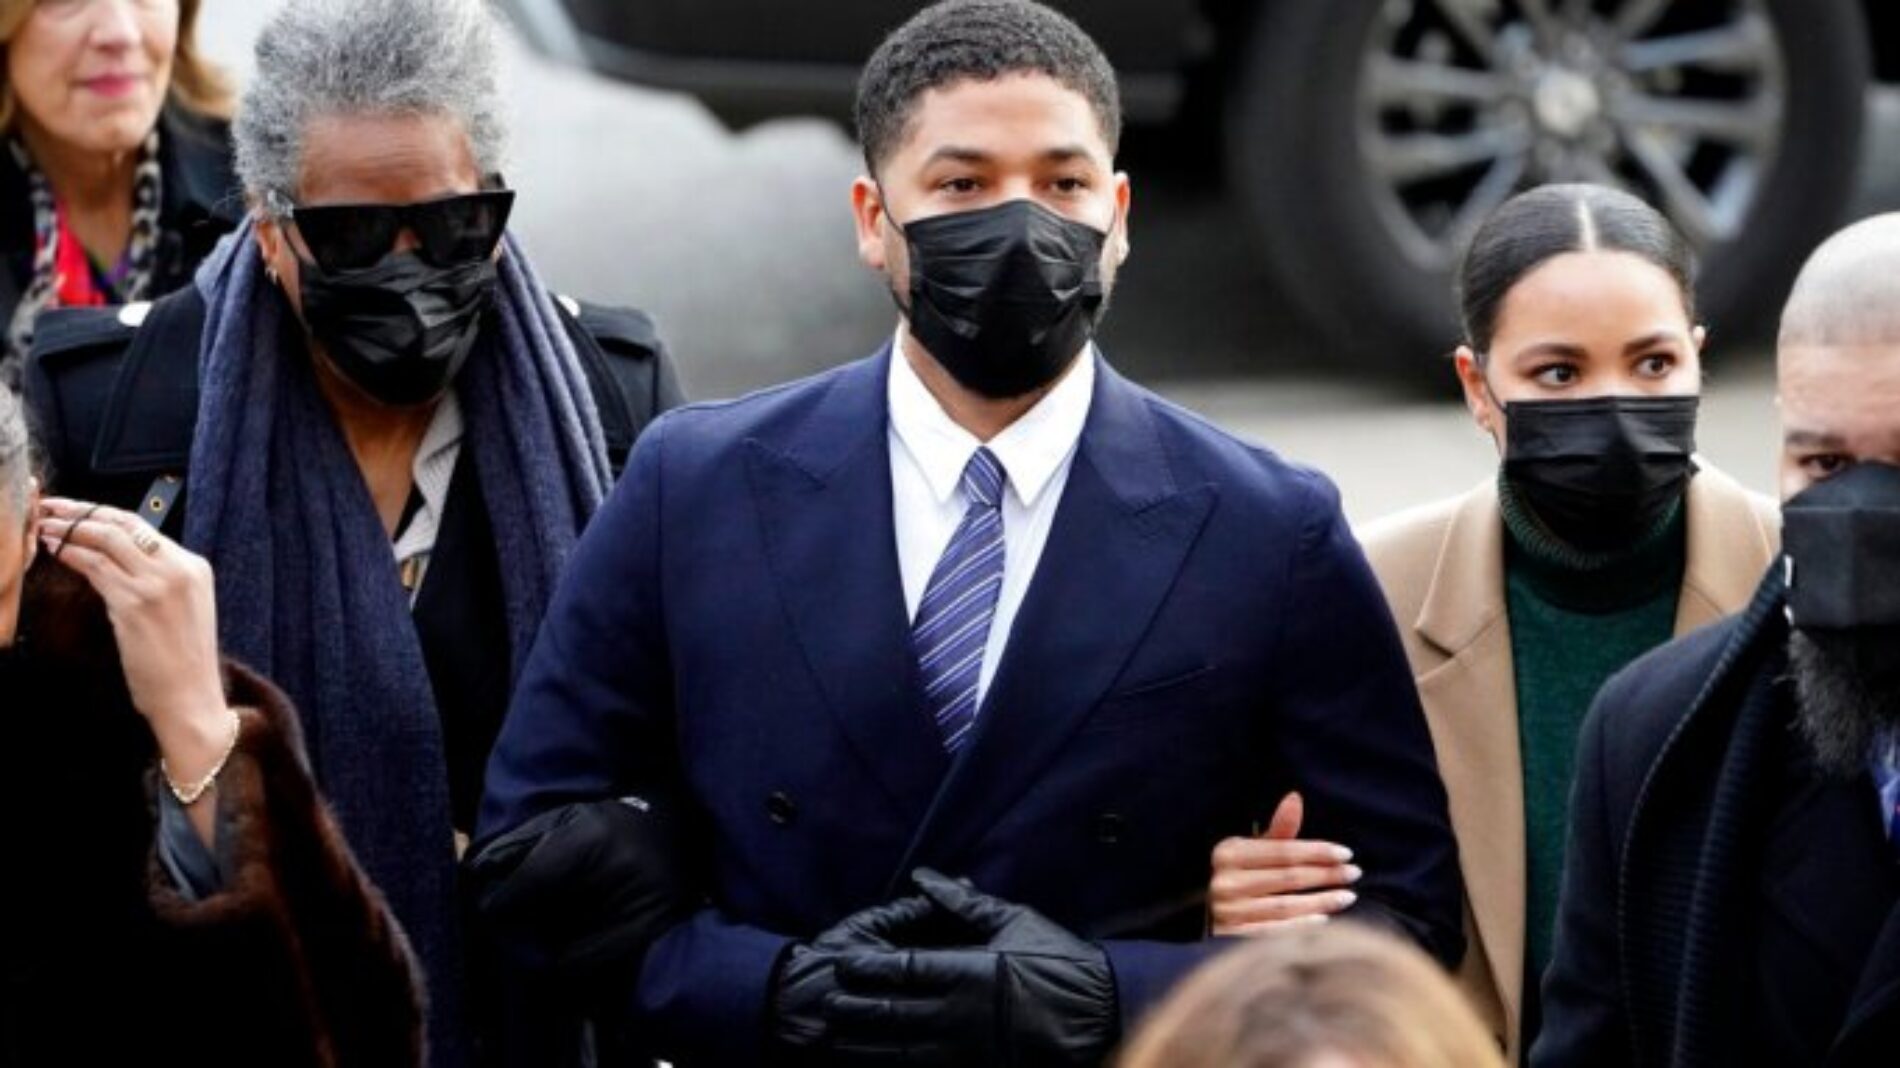 Jussie Smollett Declares 2019 Attack “Was No Hoax”, Says He Was Victim Of $2 Million Shakedown And Had A Sexual Relationship With One Of His Accusers